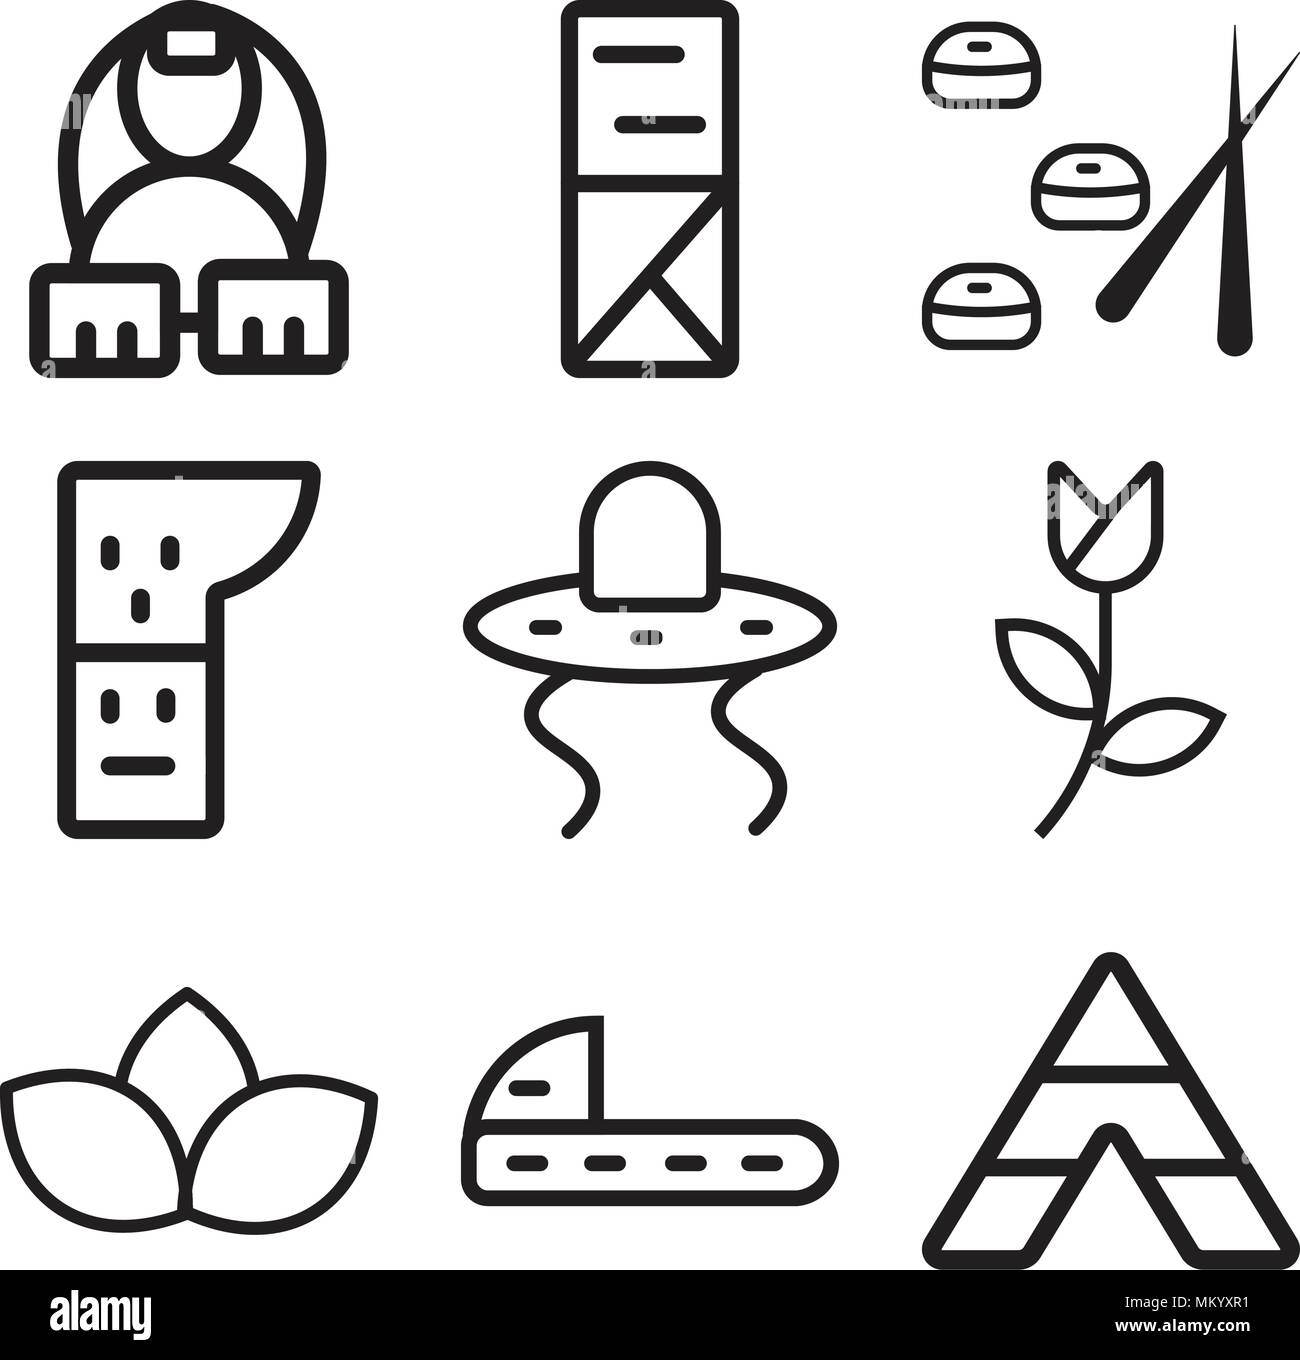 Set Of 9 simple editable icons such as Tipi, Shoes, Lotus, Tulip, Cowboy, Totem, Sushi, Kimono, Egyptian, can be used for mobile, web Stock Vector